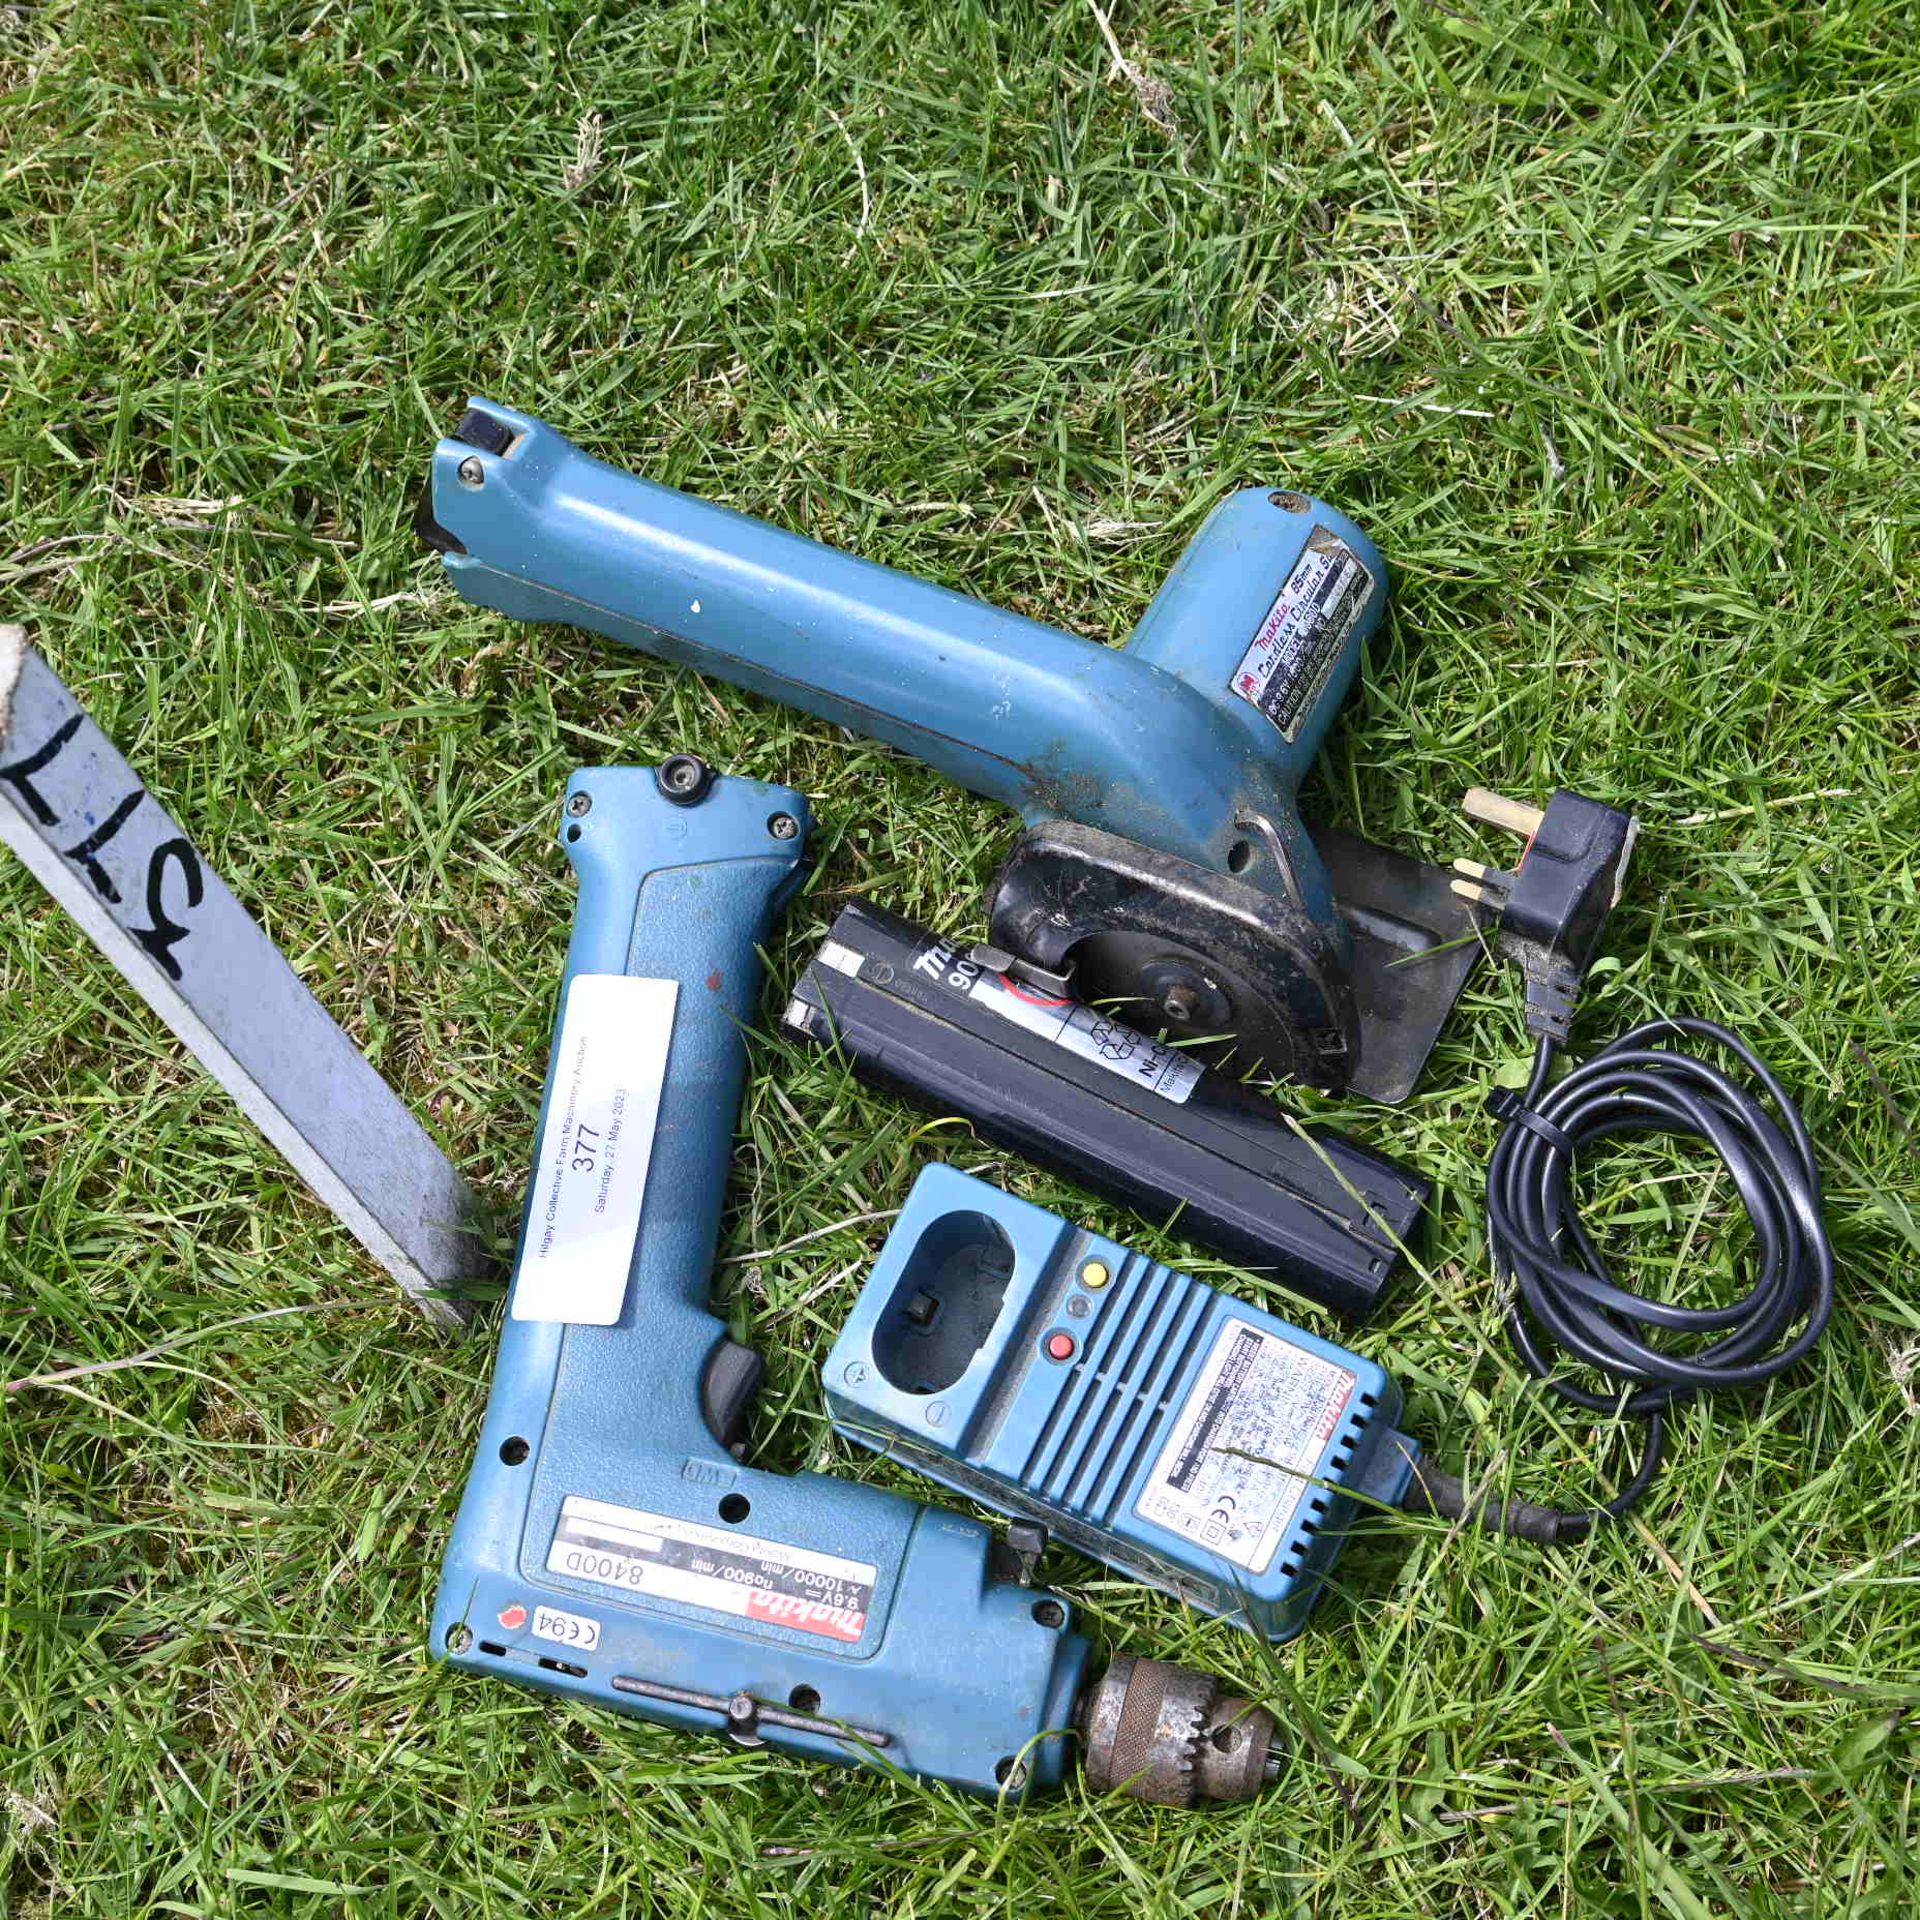 Makita drill and saw 9 Volt with battery and charger